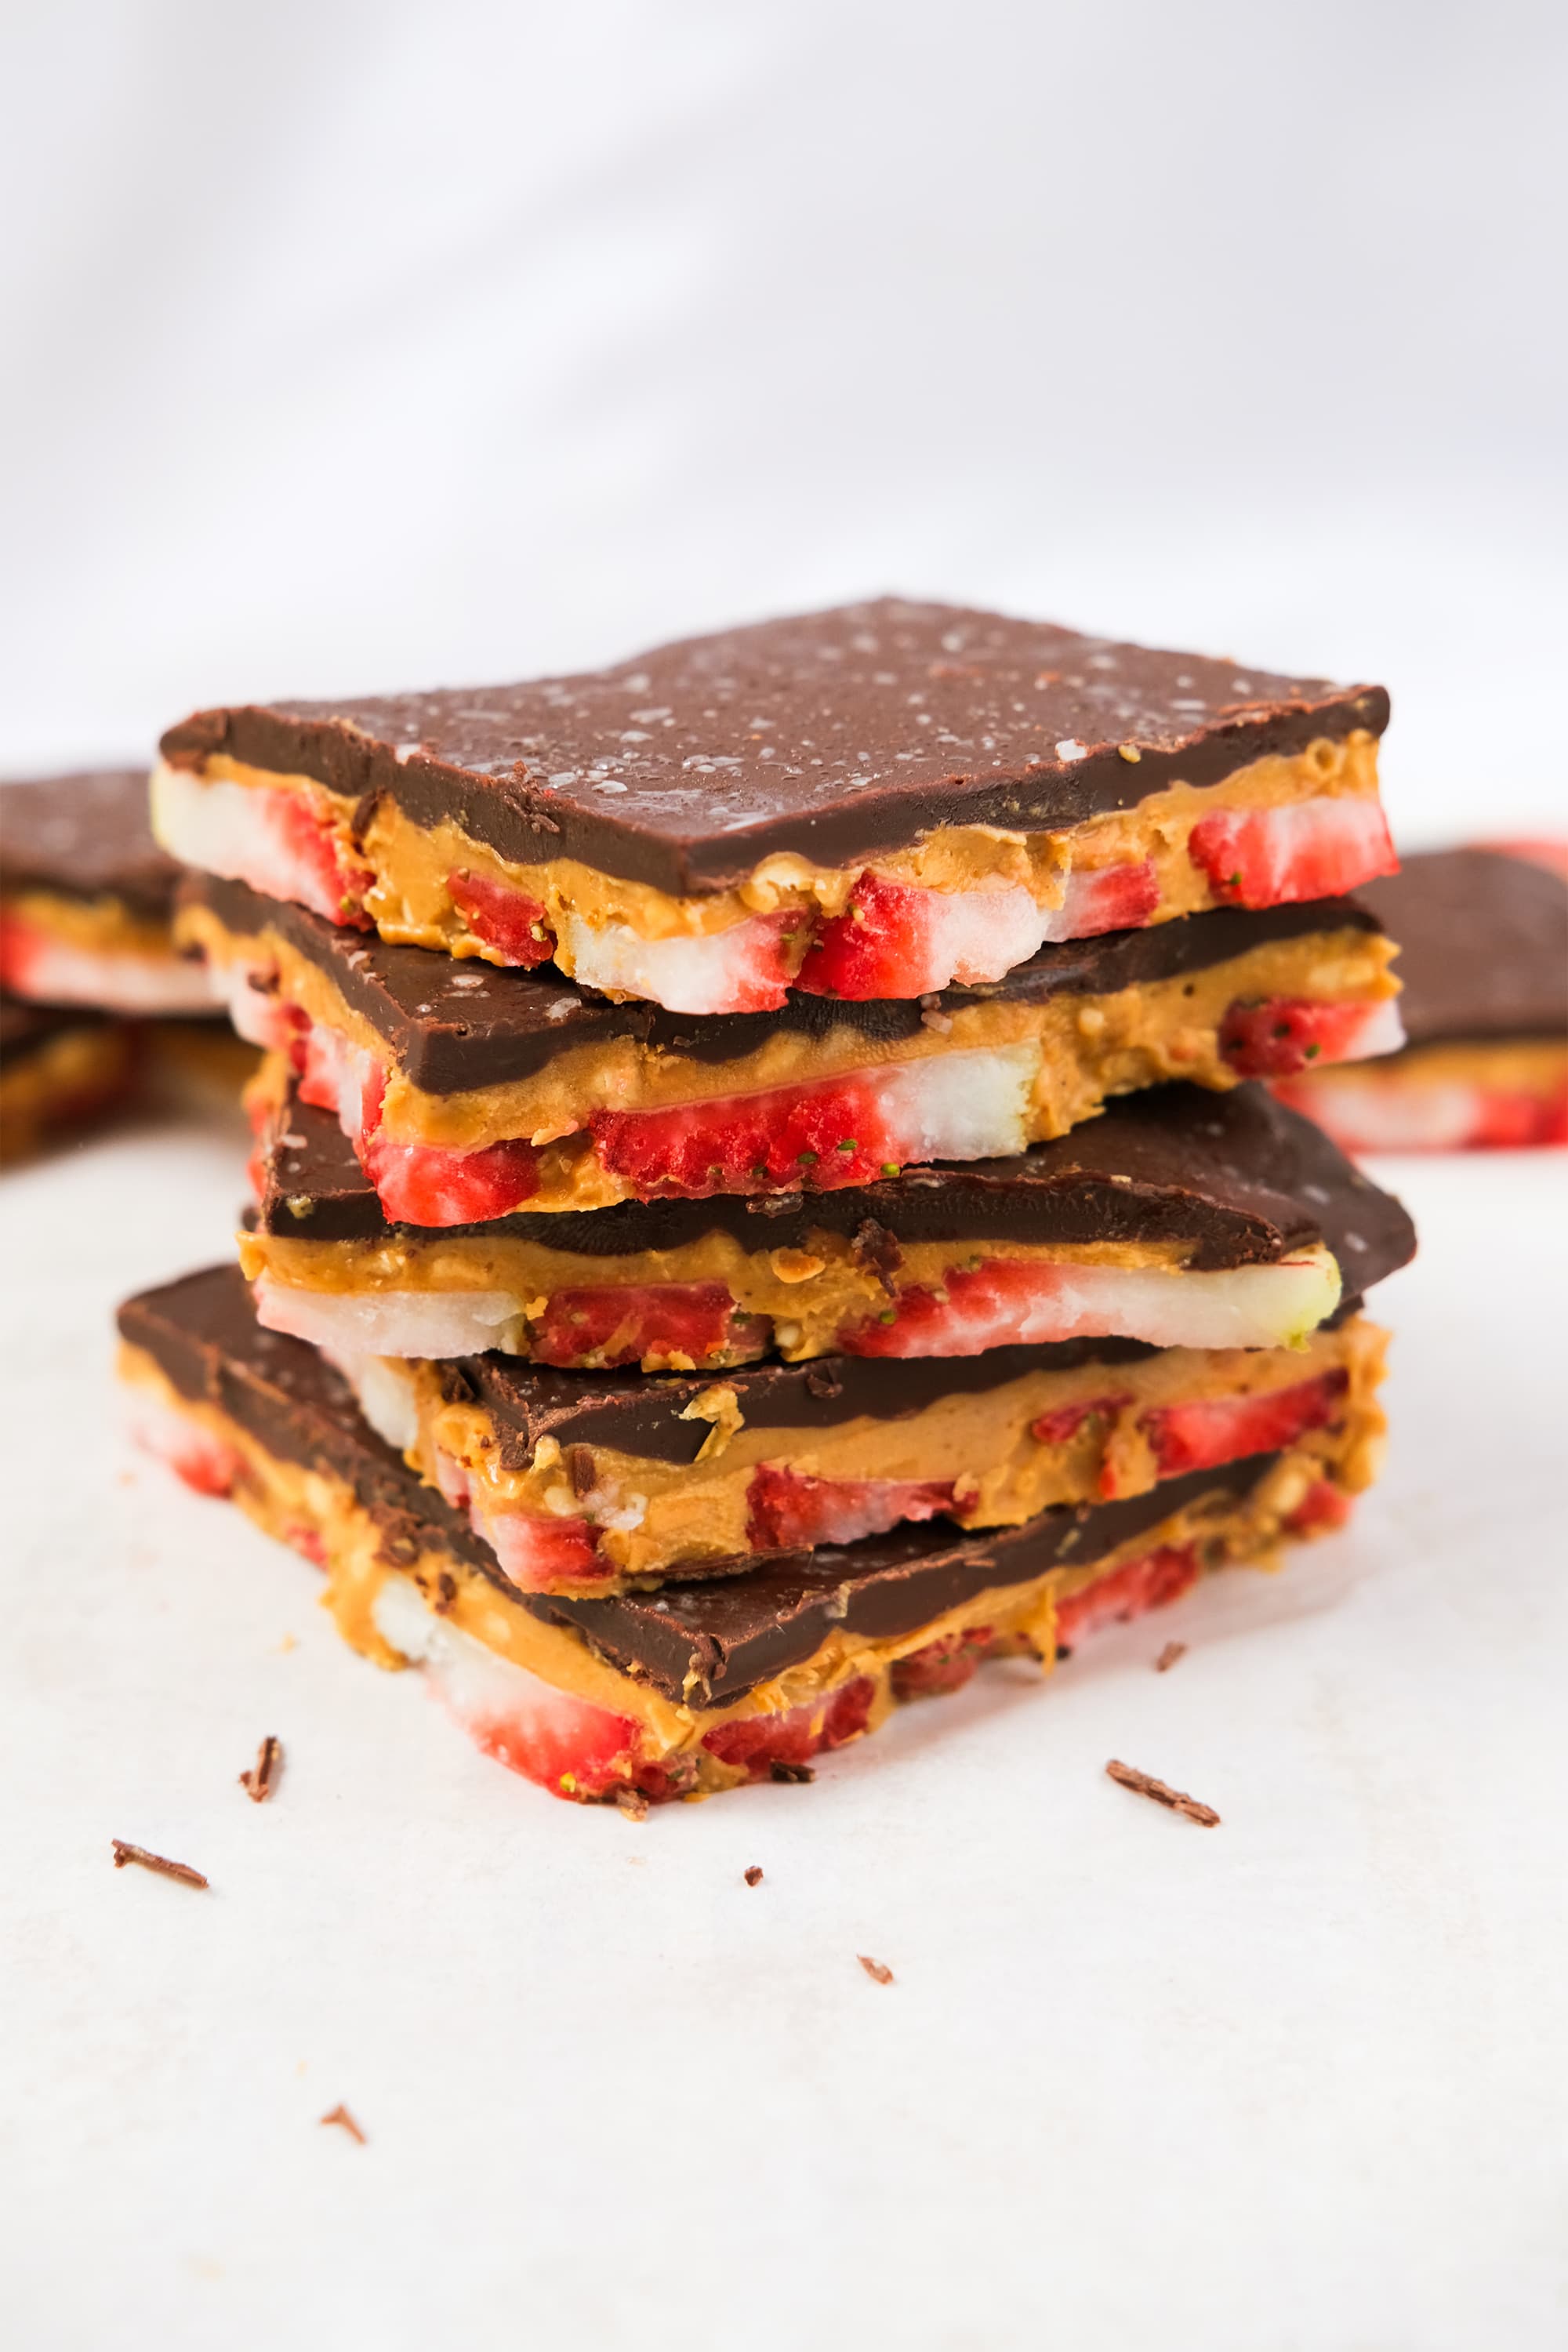 I Tried the Viral 3-Ingredient Strawberry Peanut Butter Bark